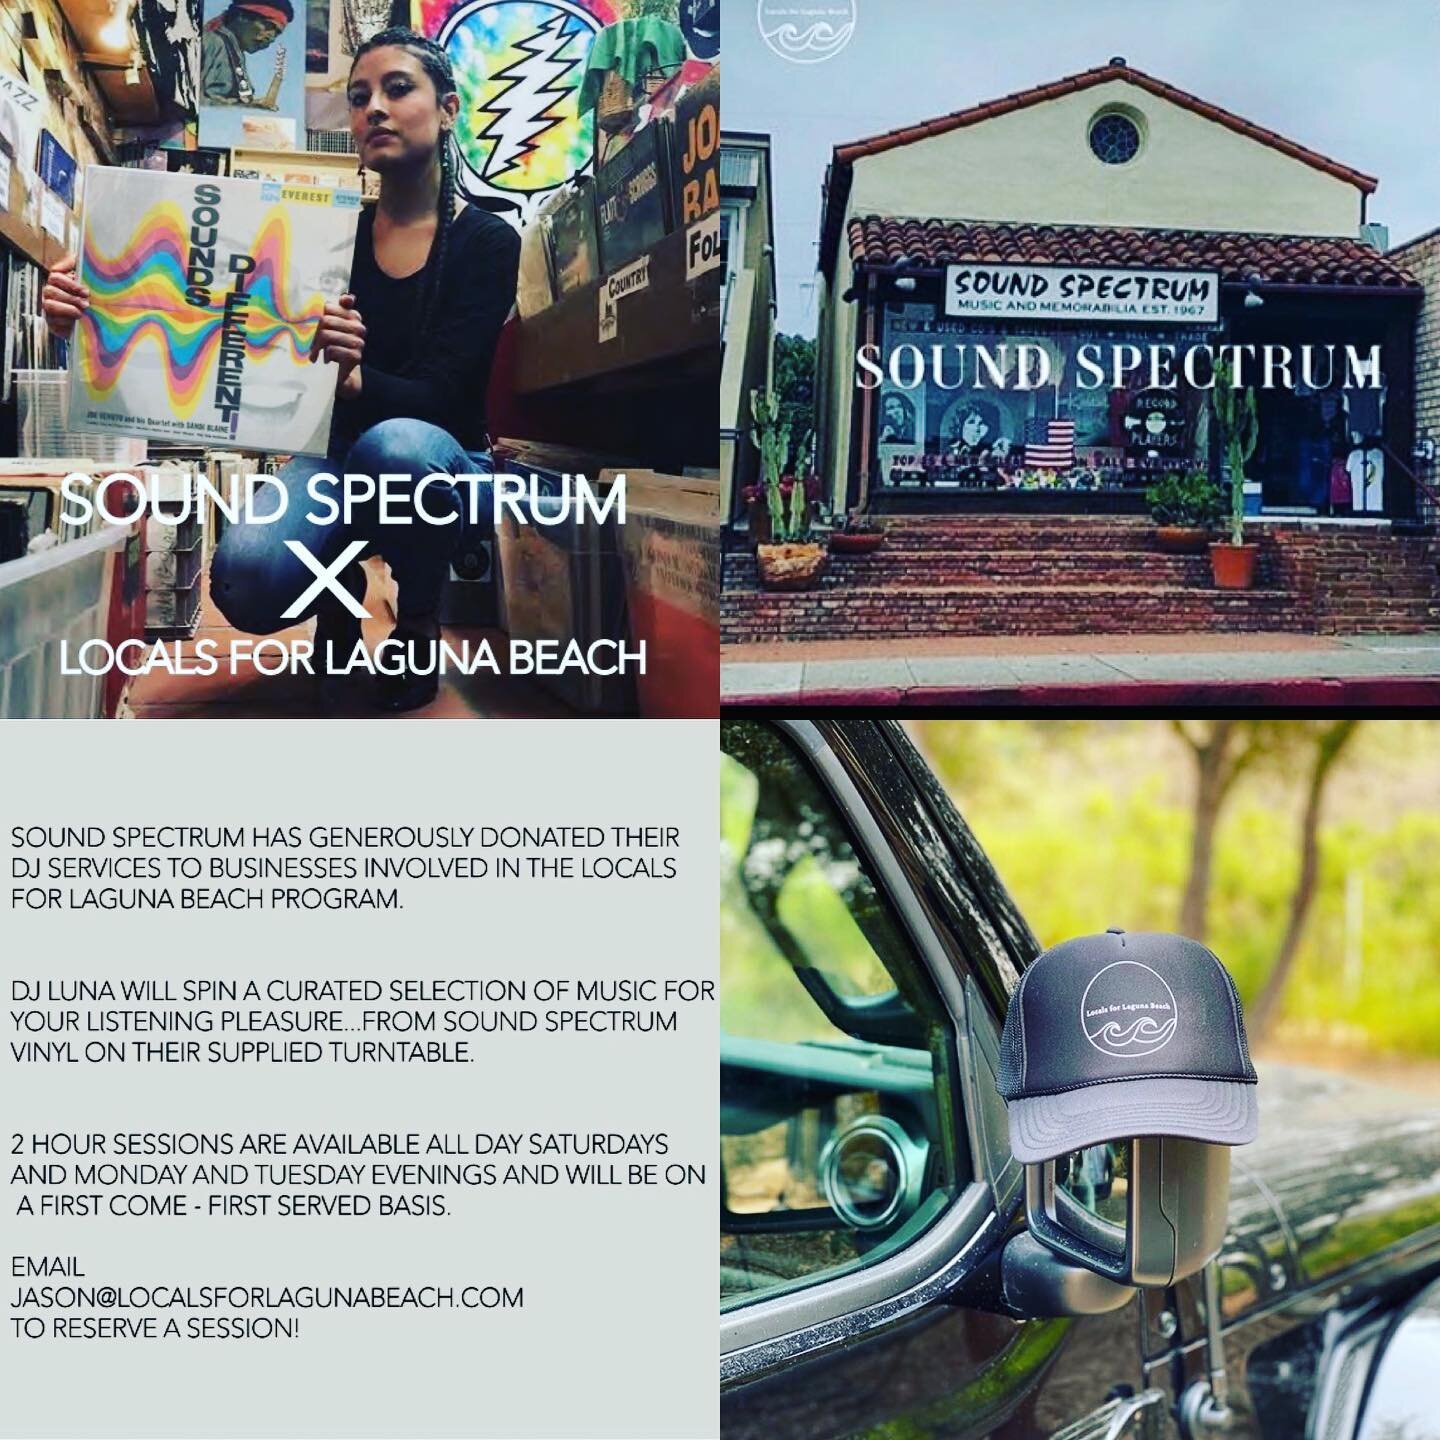 SOUND SPECTRUM X LOCALS FOR LAGUNA BEACH COLLAB OF THE.....

Wave and Sound Spectrum ARE VERY GENEROUSLY Offering FREE 2hr DJ Luna Sessions (First Come First Serve Basis!) to those Shops and Restaurants that Participate in the Locals Program!!!! This